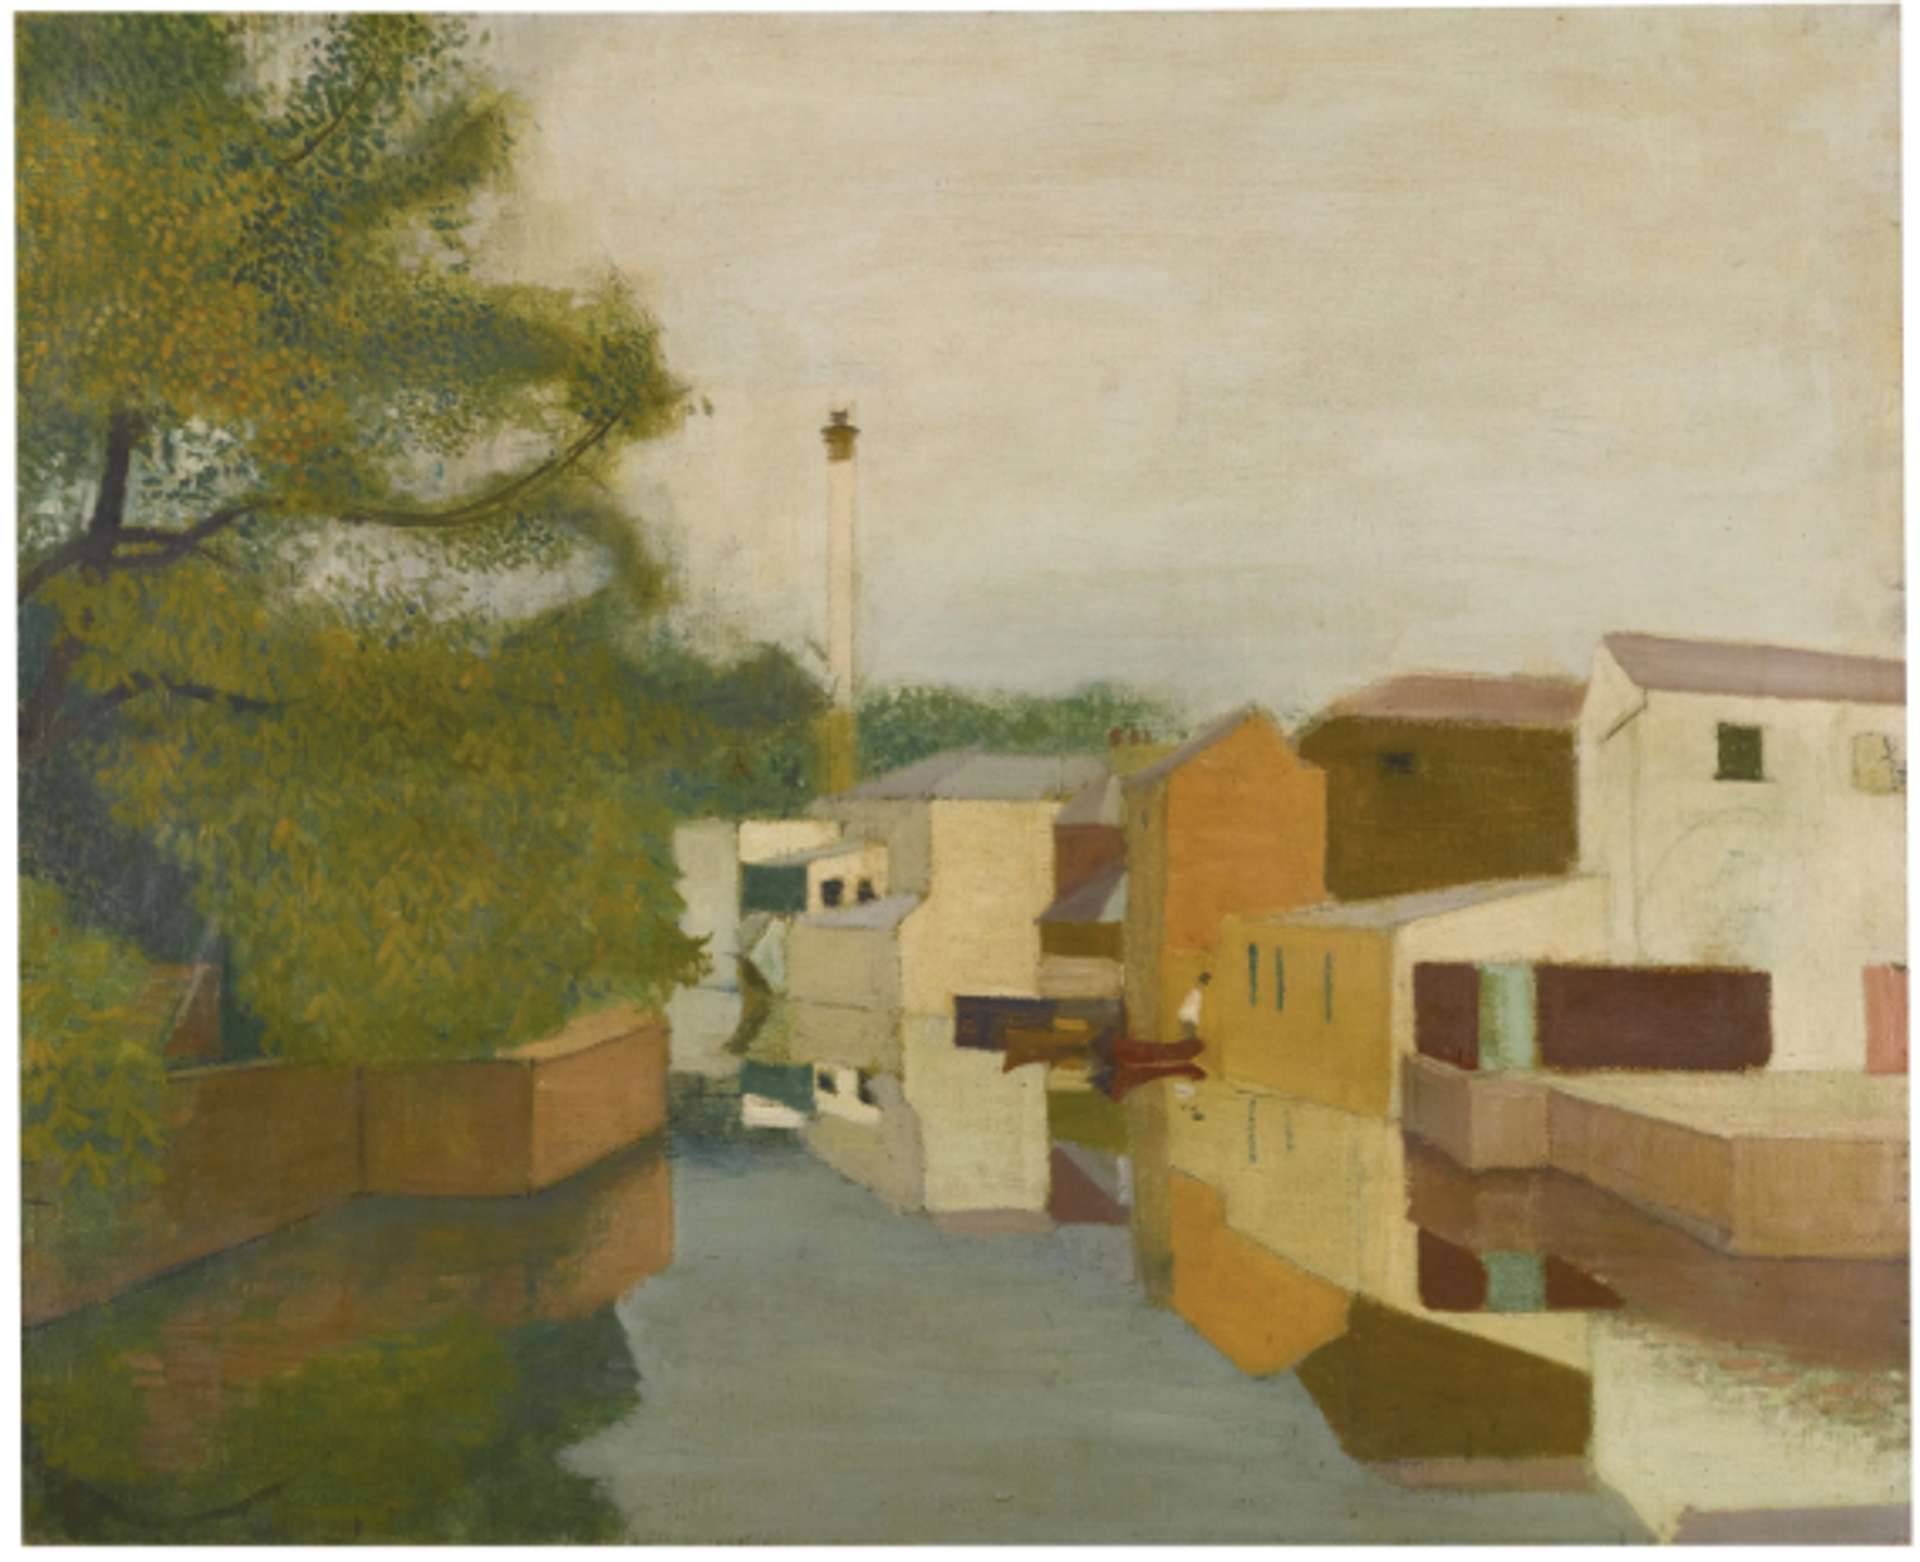 A landscape painting in an abstract style depicting a river with a reflection of a verdant tree hanging from the left side of the artwork. On the right side, there are geometrically abstracted houses rendered in different tones of white, beige, and brown.